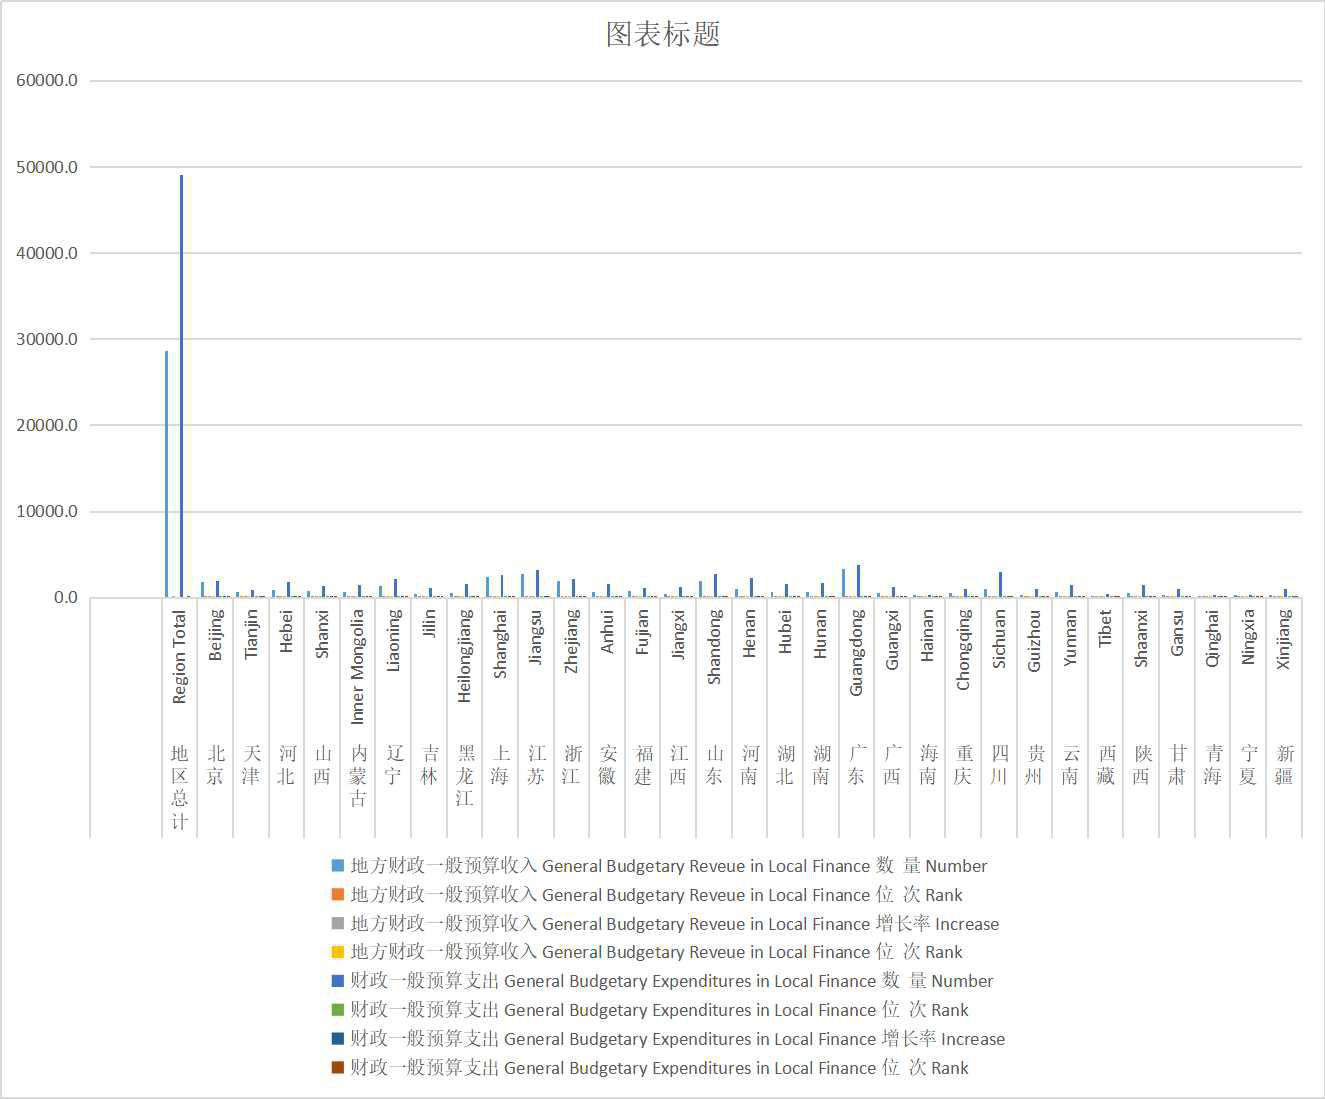 Revenue and expenditure of local governments in China (2001-2008)